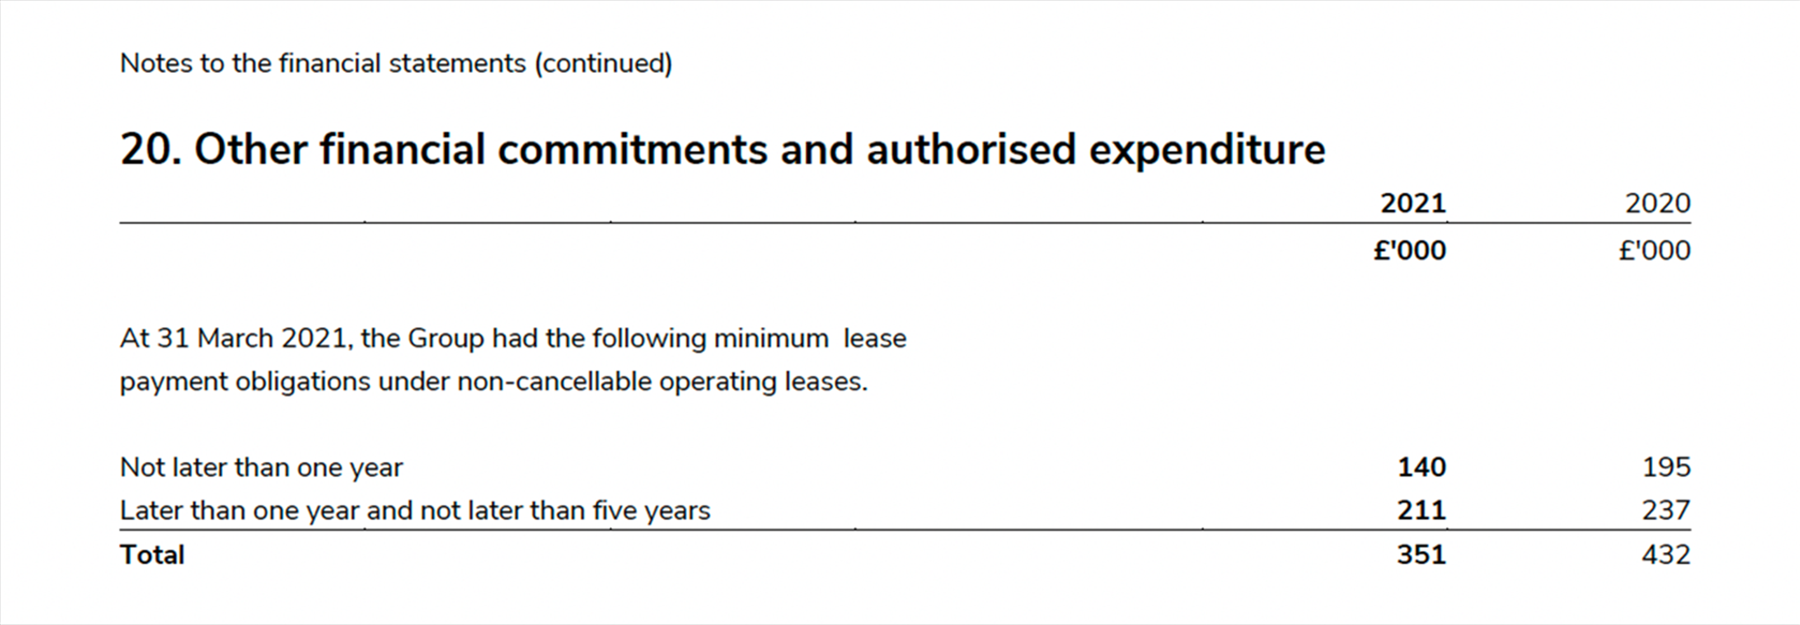 Other financial commitments and authorised expenditure